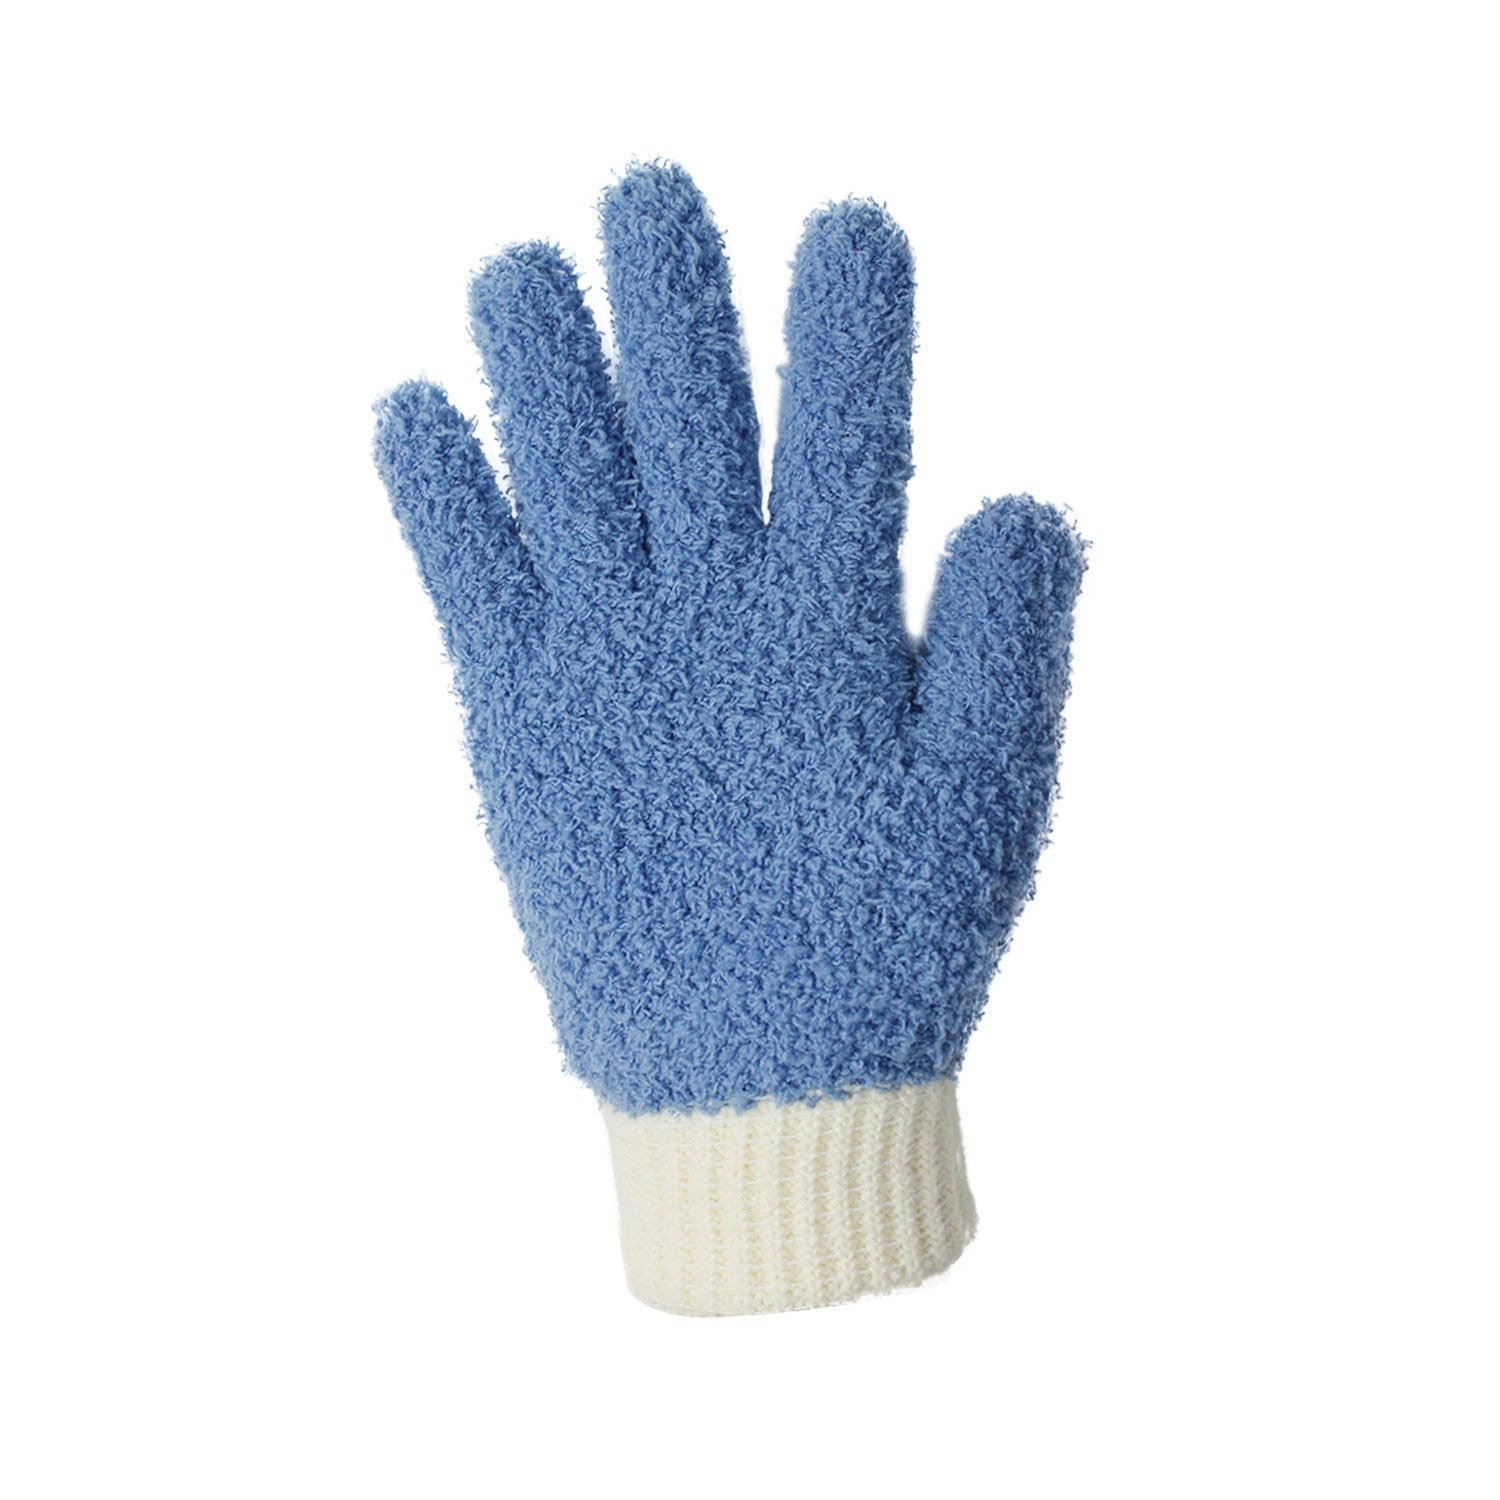  Evridwear Microfiber Dusting Gloves, Dusting Cleaning